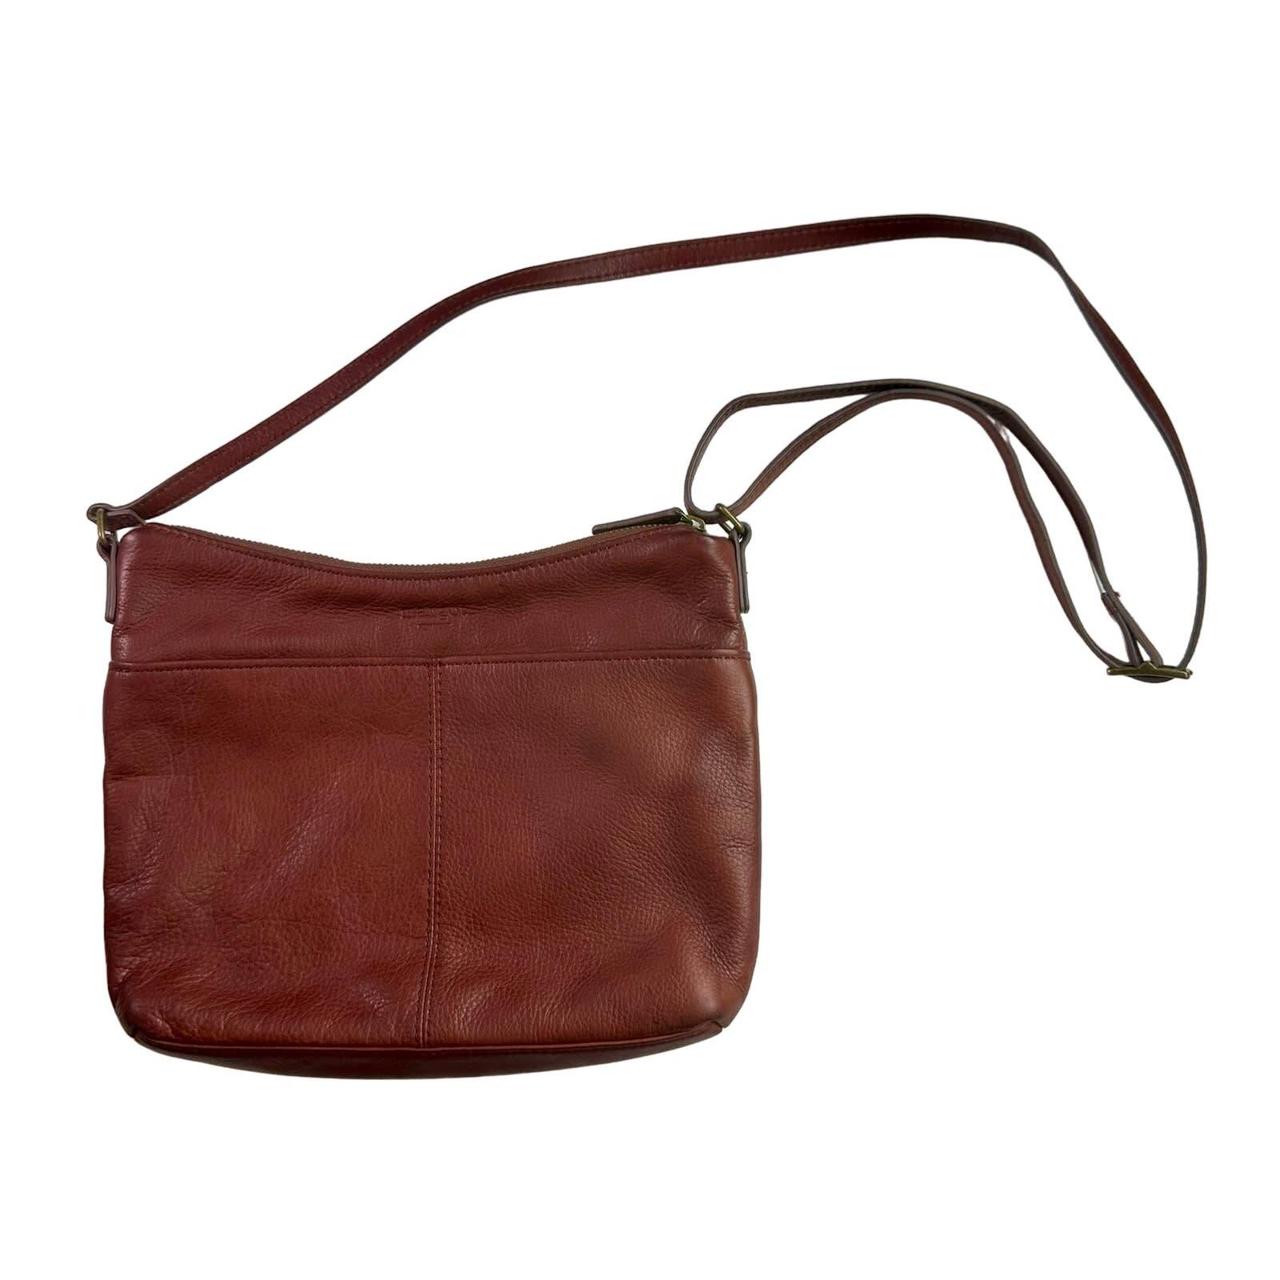 Anthropologie Margot New York Soft Brown Leather Crossbody Fold Over Purse  Bag - $34 - From Jims